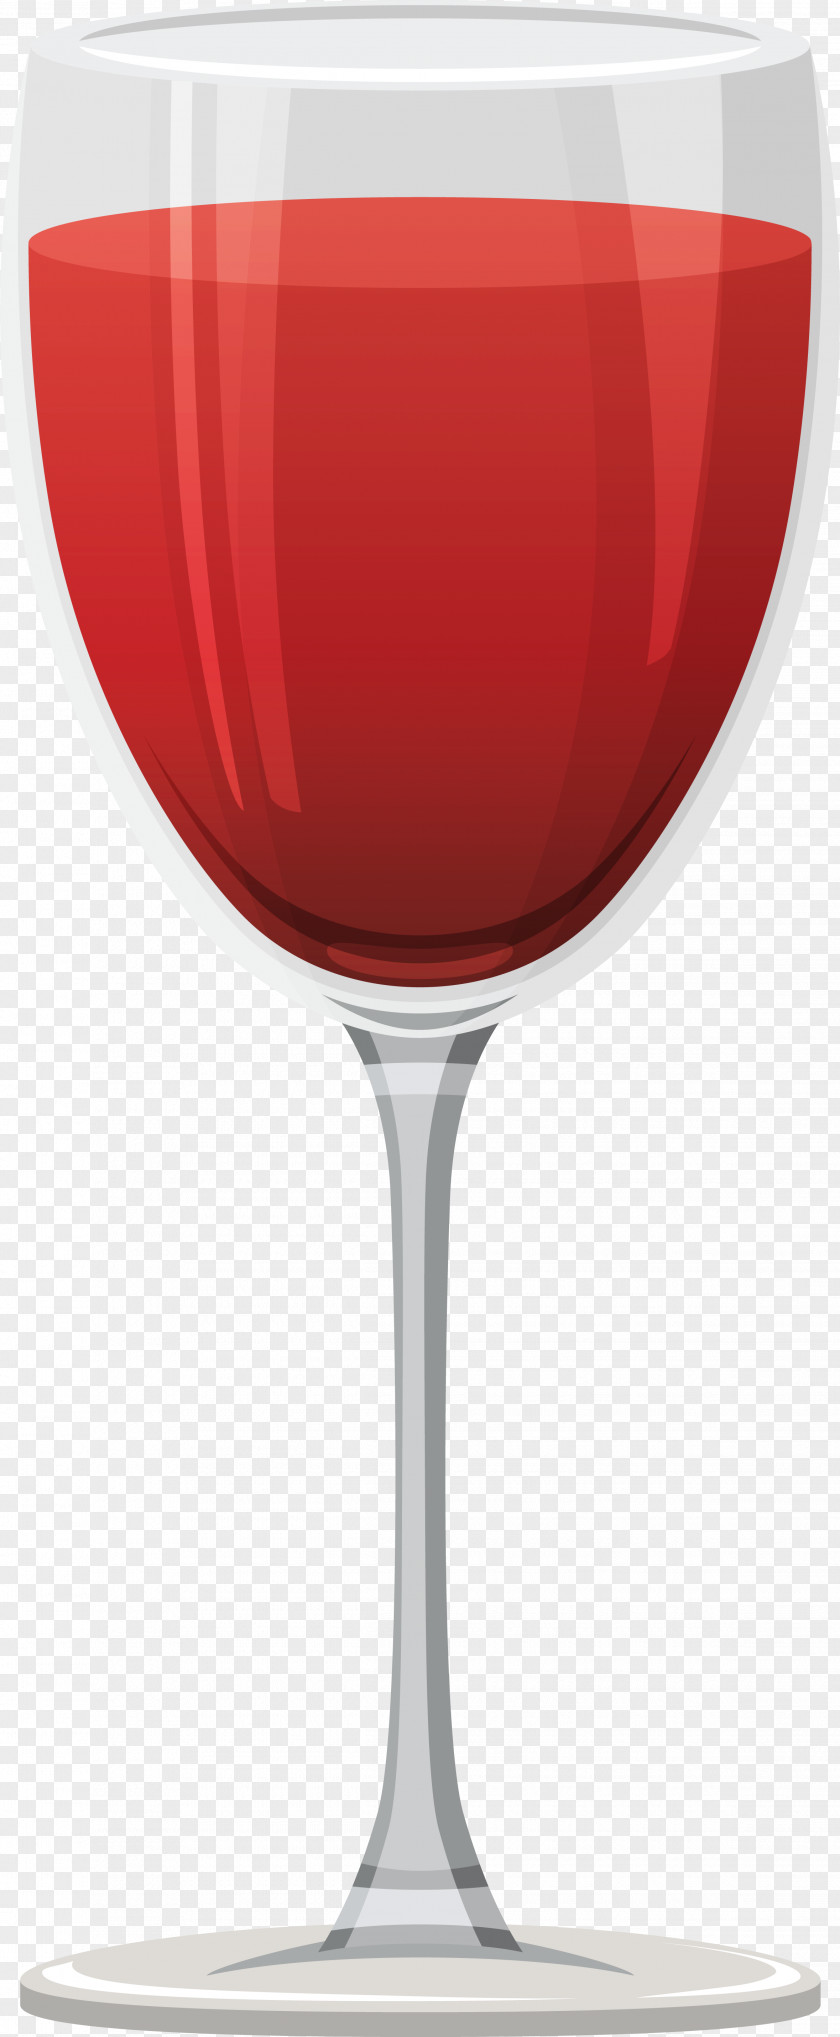 Red Wine Glass Image Cocktail Clip Art PNG